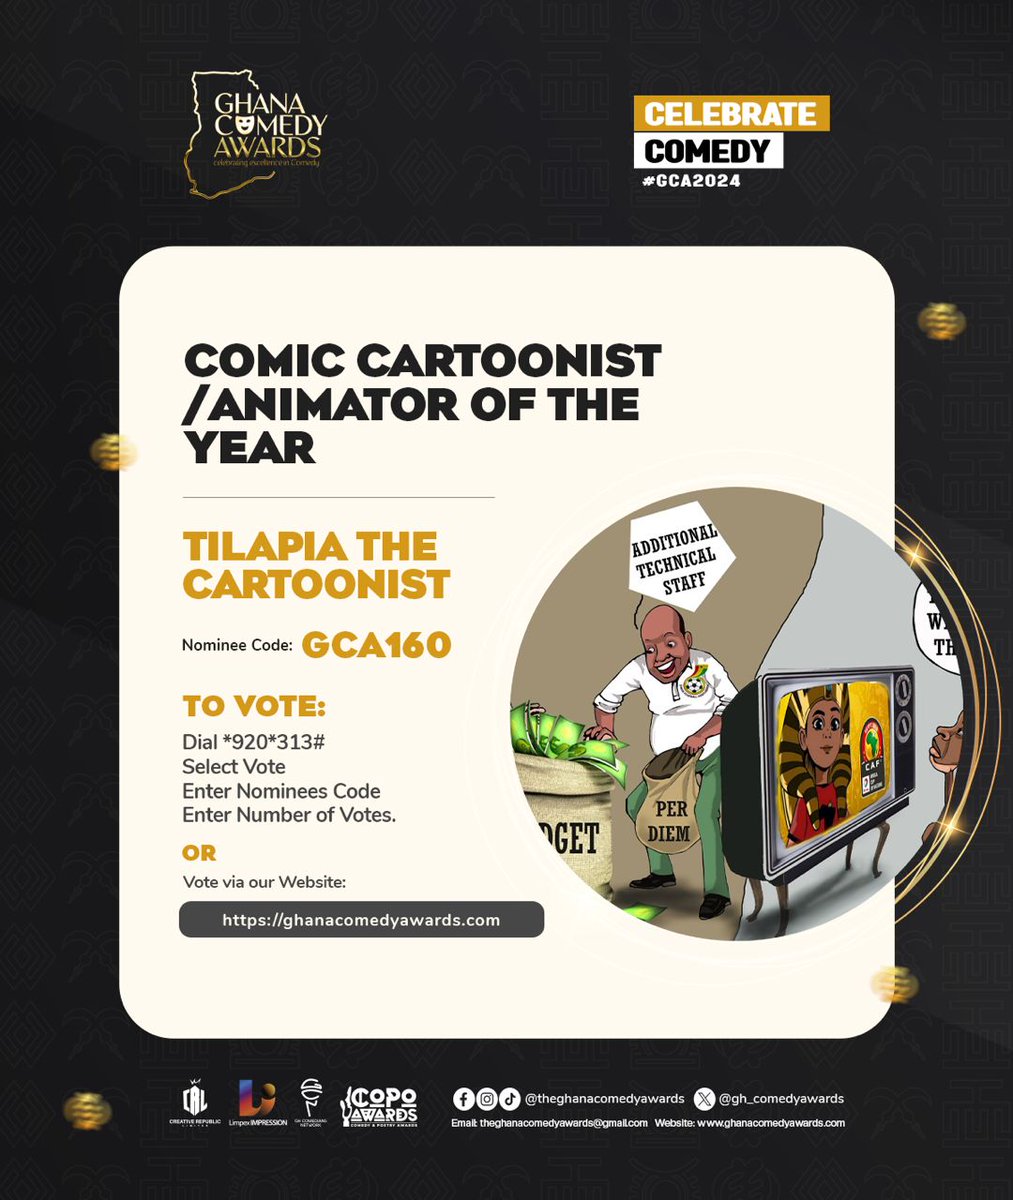 We have done it before, let's do it again! Kindly vote for Tilapia Da Cartoonist to win the Comic Cartoonist/Animator Of The Year Award #GhanaComedyAwards